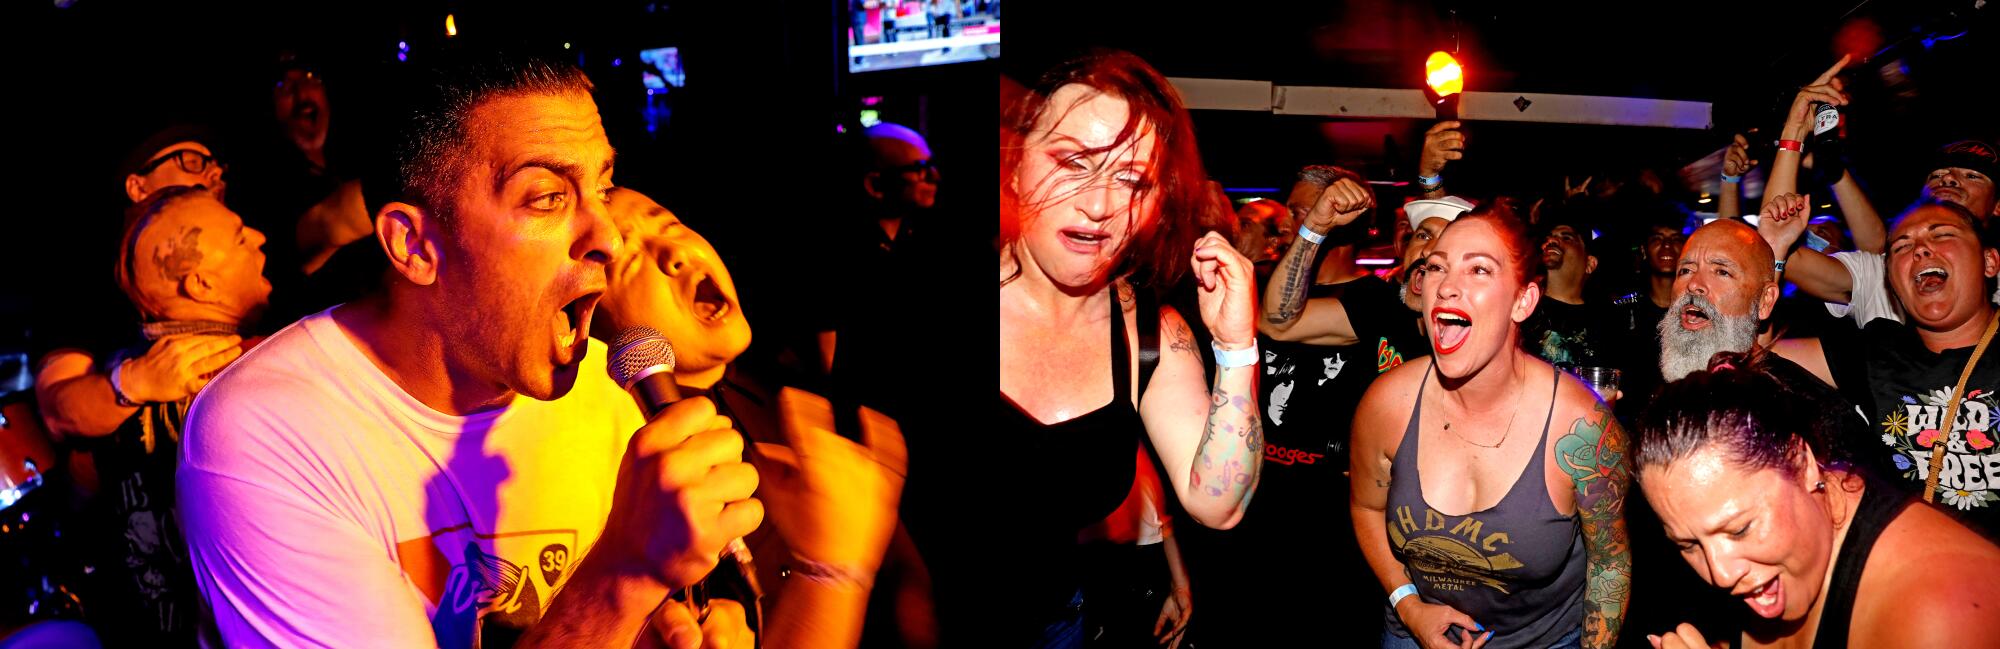 Two photos showing a man singing into a microphone in one and women in the audience moshing